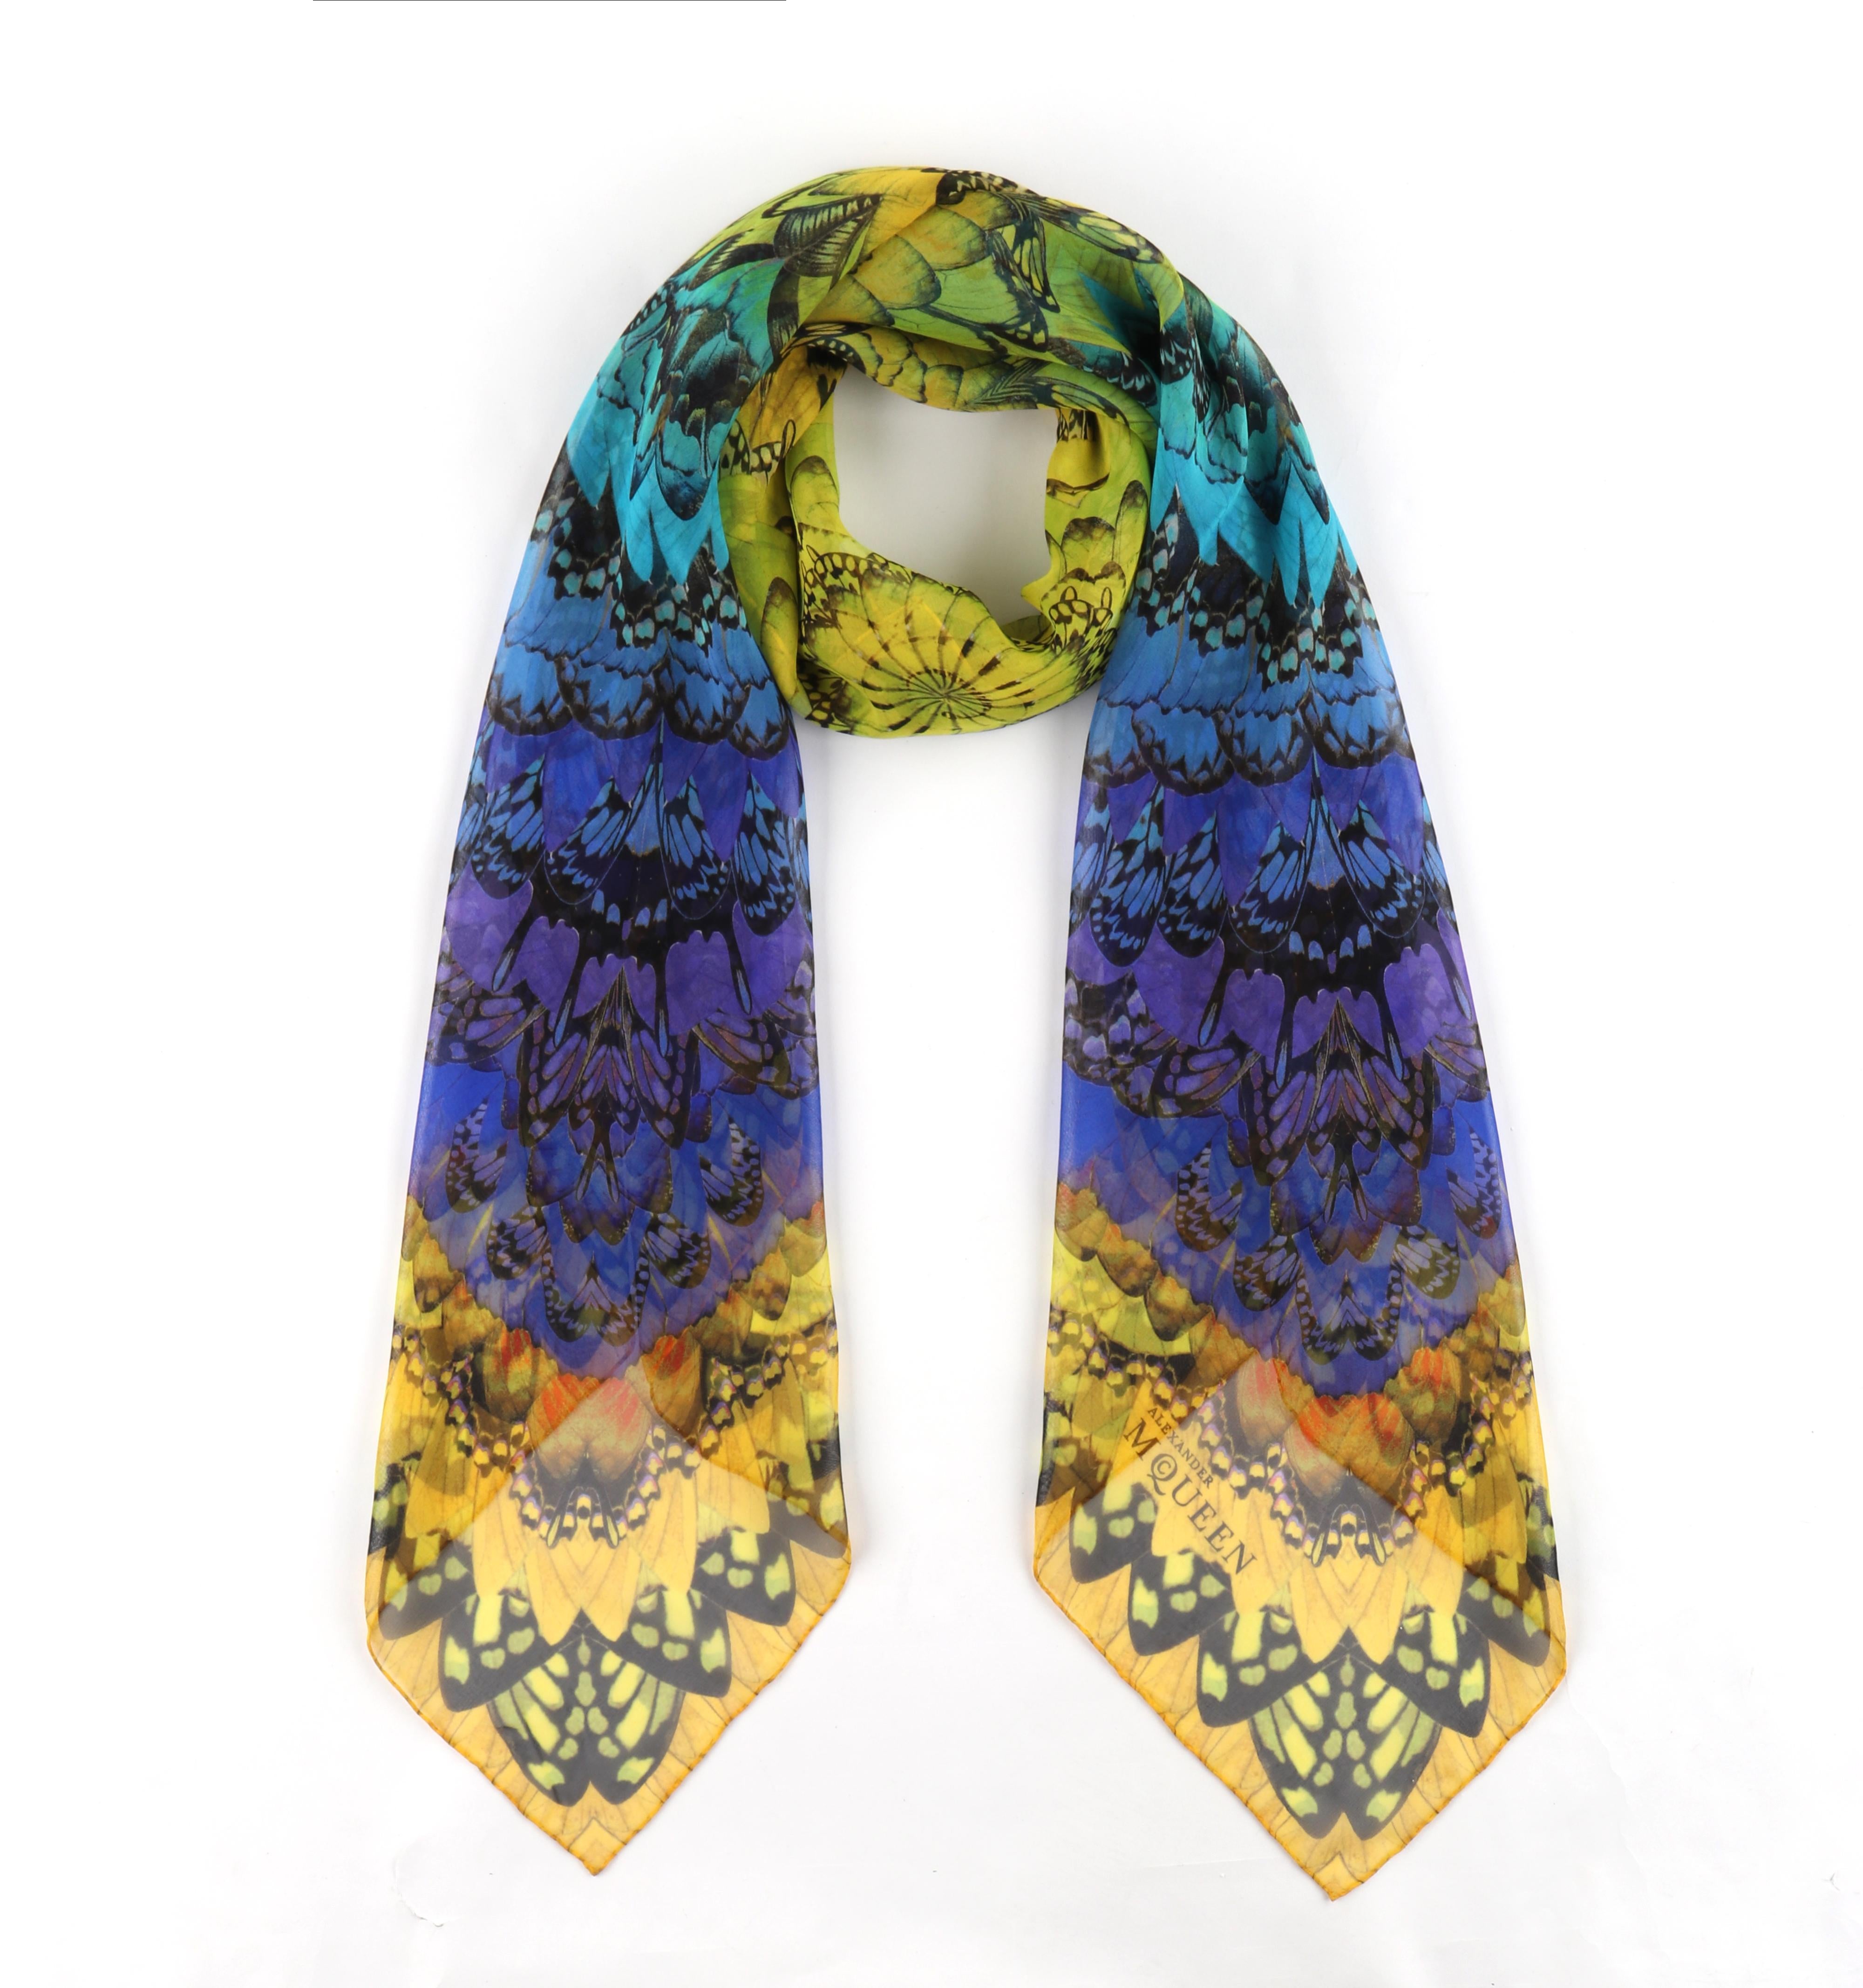 ALEXANDER McQUEEN S/S 2008 Rainbow Wings Kaleidoscope Blue Yellow Square Scarf
 
Brand / Manufacturer: Alexander McQueen
Collection: S/S 2008
Manufacturer Style Name: Rainbow Wings
Style: Square scarf
Color(s): Shades of purple, blue, green, yellow,